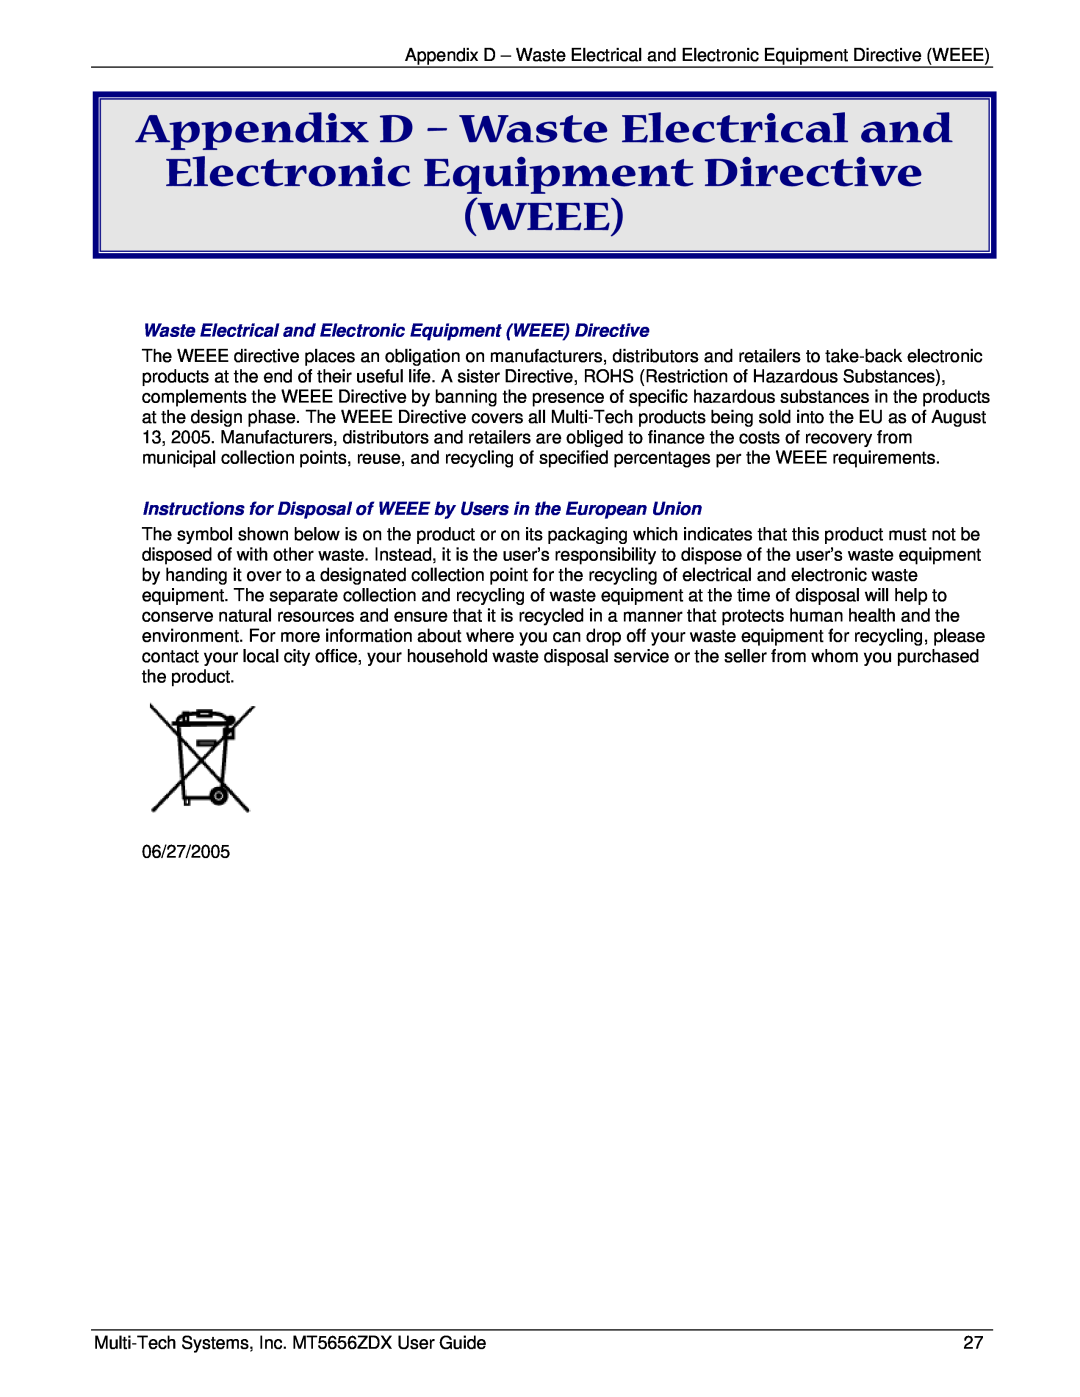 Multi Tech Equipment MT5656ZDX manual Appendix D - Waste Electrical and Electronic Equipment Directive WEEE 